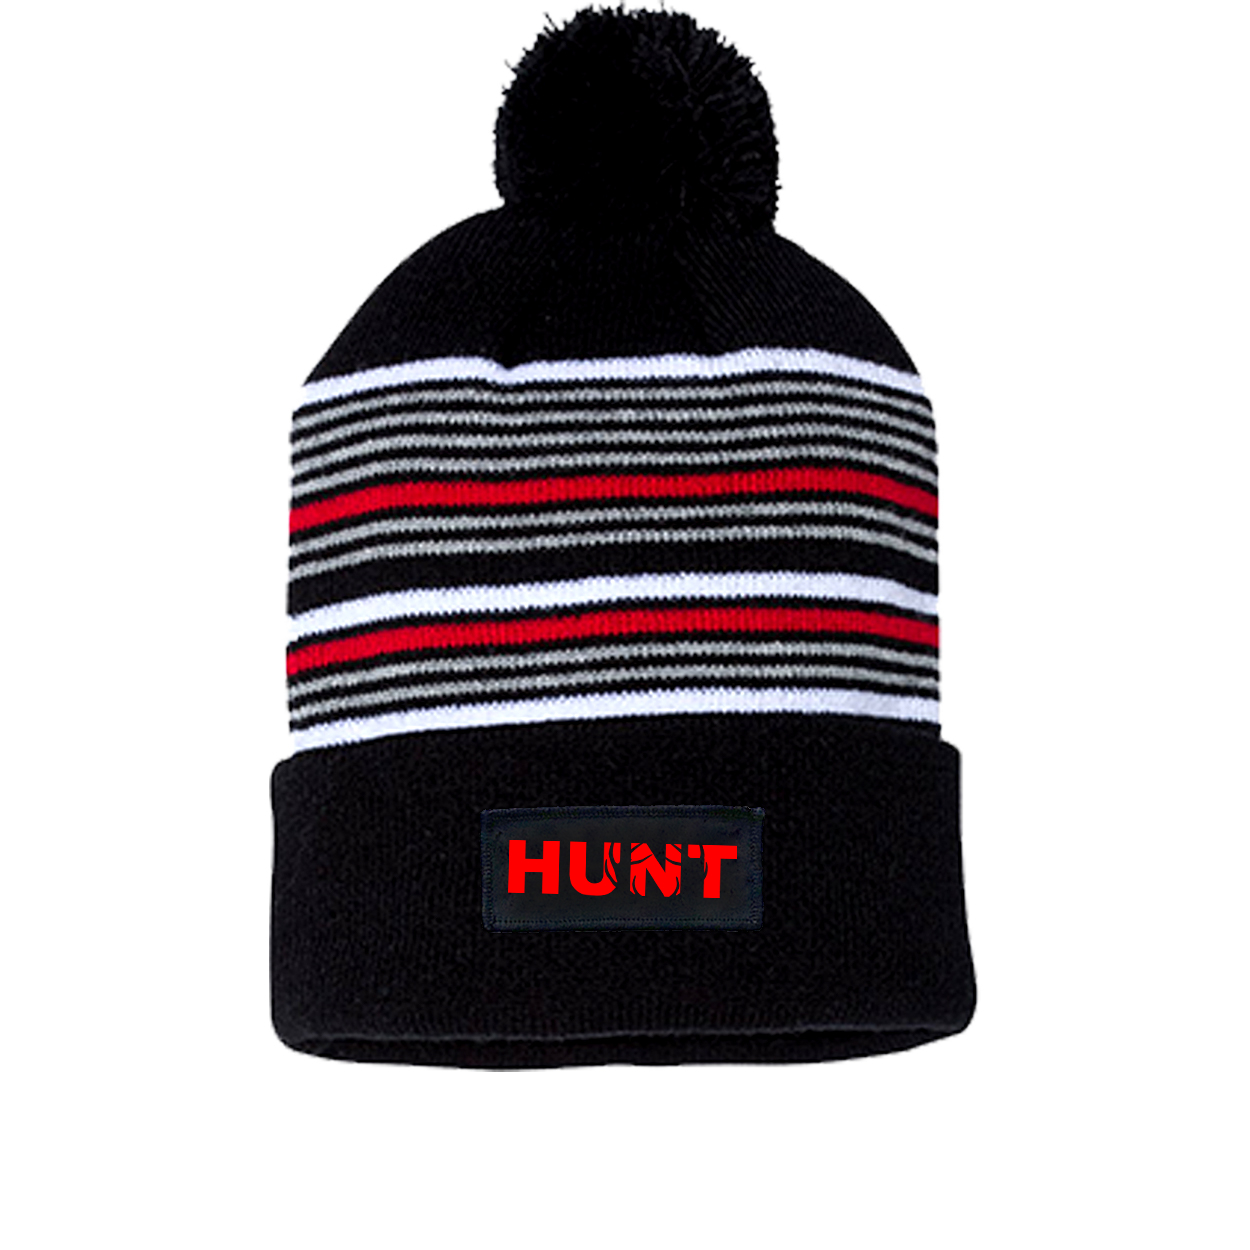 Hunt Rack Logo Night Out Woven Patch Roll Up Pom Knit Beanie Black/ White/ Grey/ Red Beanie (Red Logo)